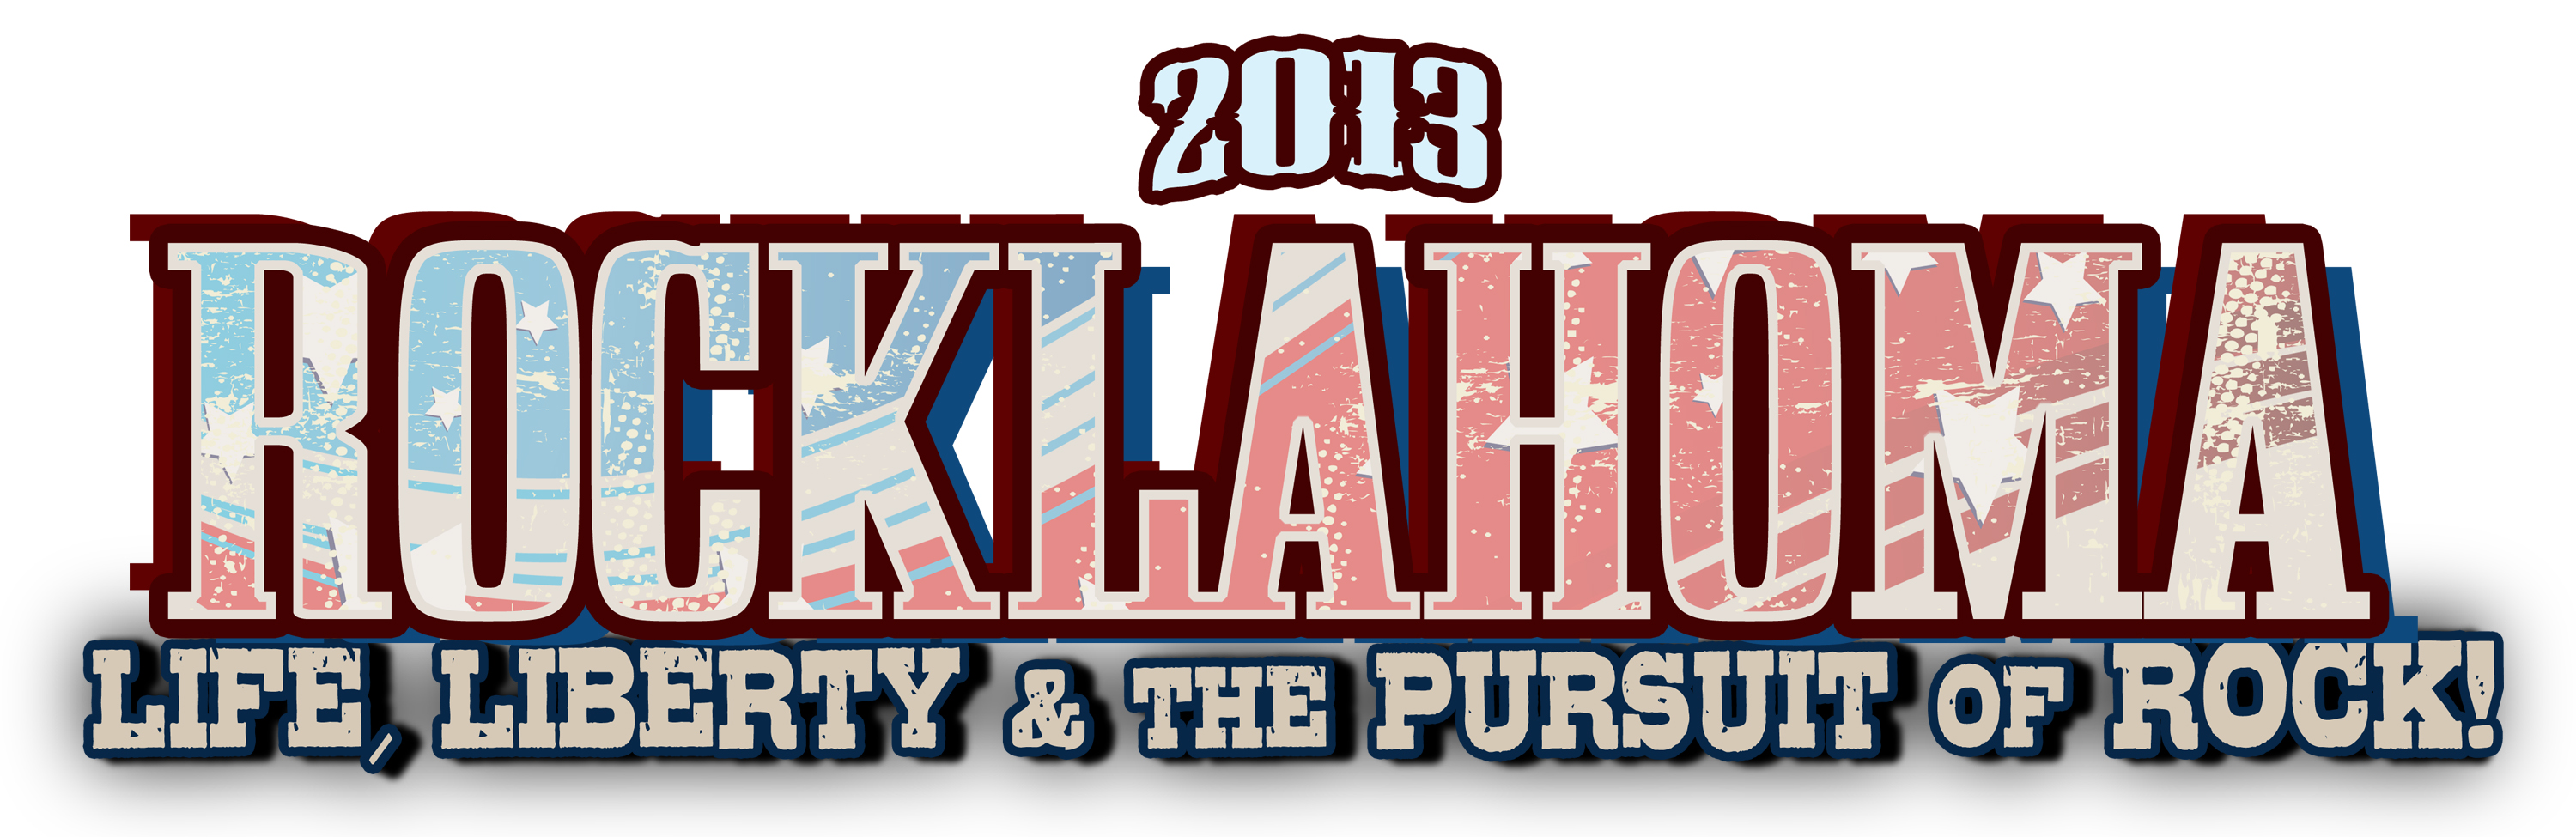 Rocklahoma 2013 Features Headliners  Guns N’ Roses, Alice In Chains & Korn